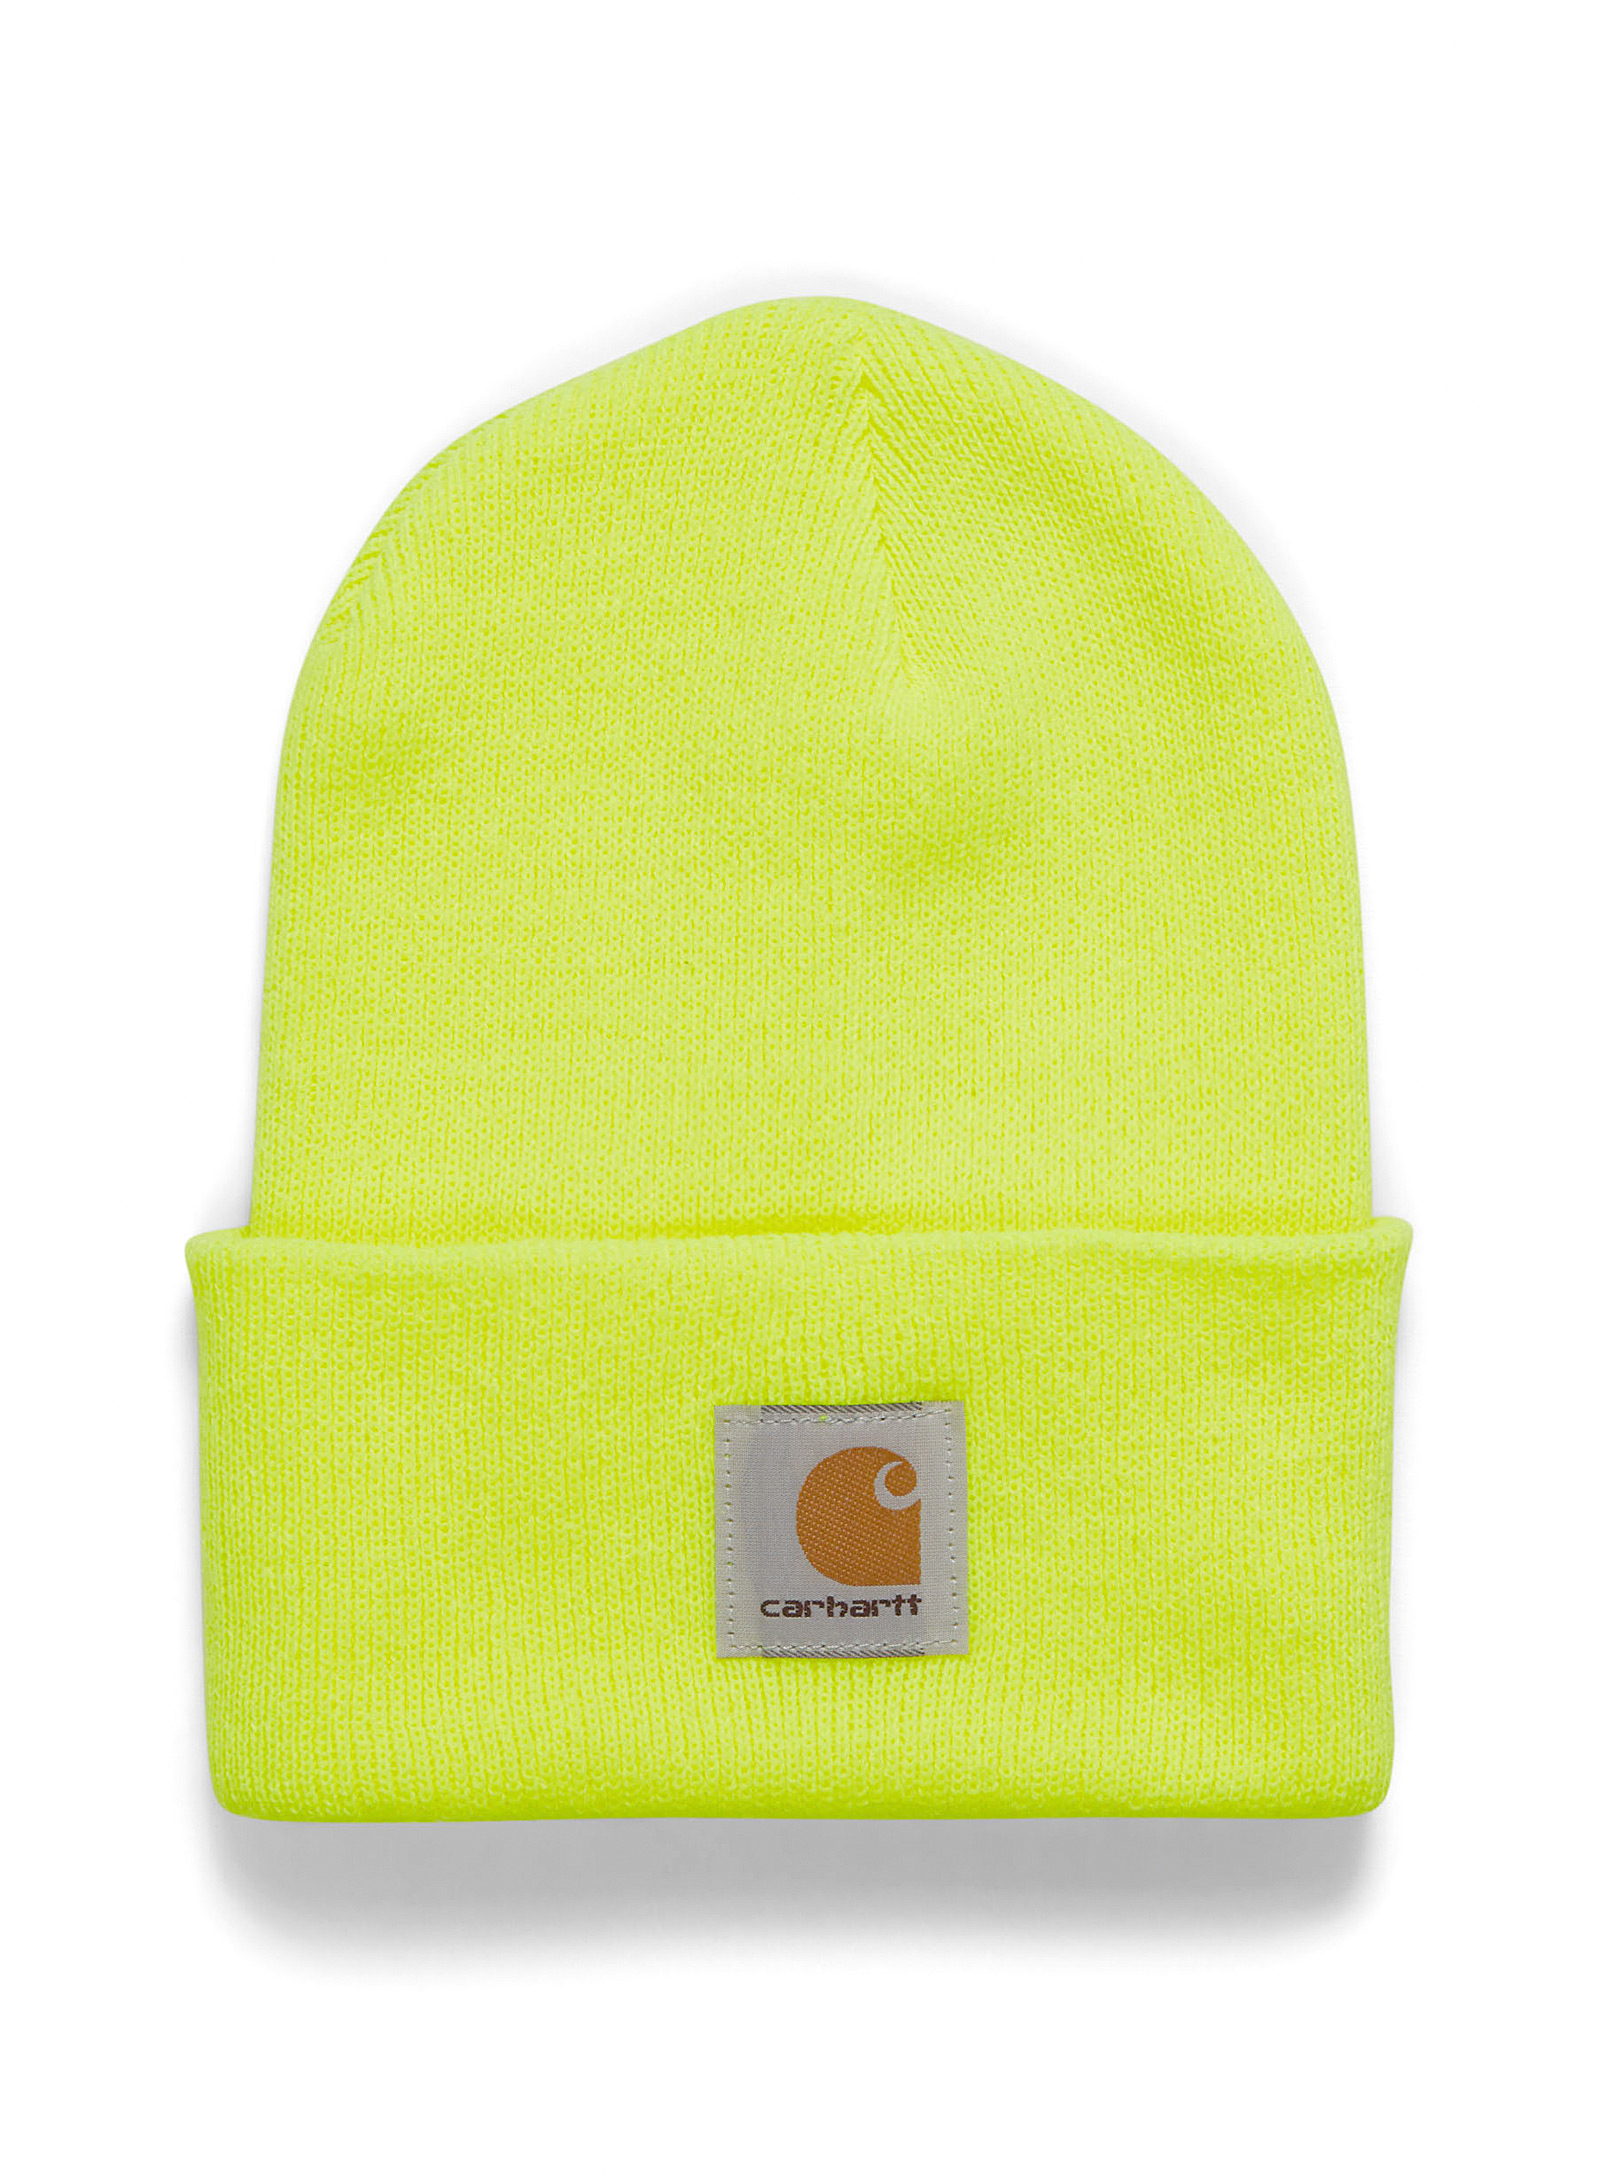 Carhartt Ribbed Worker Tuque In Golden Yellow